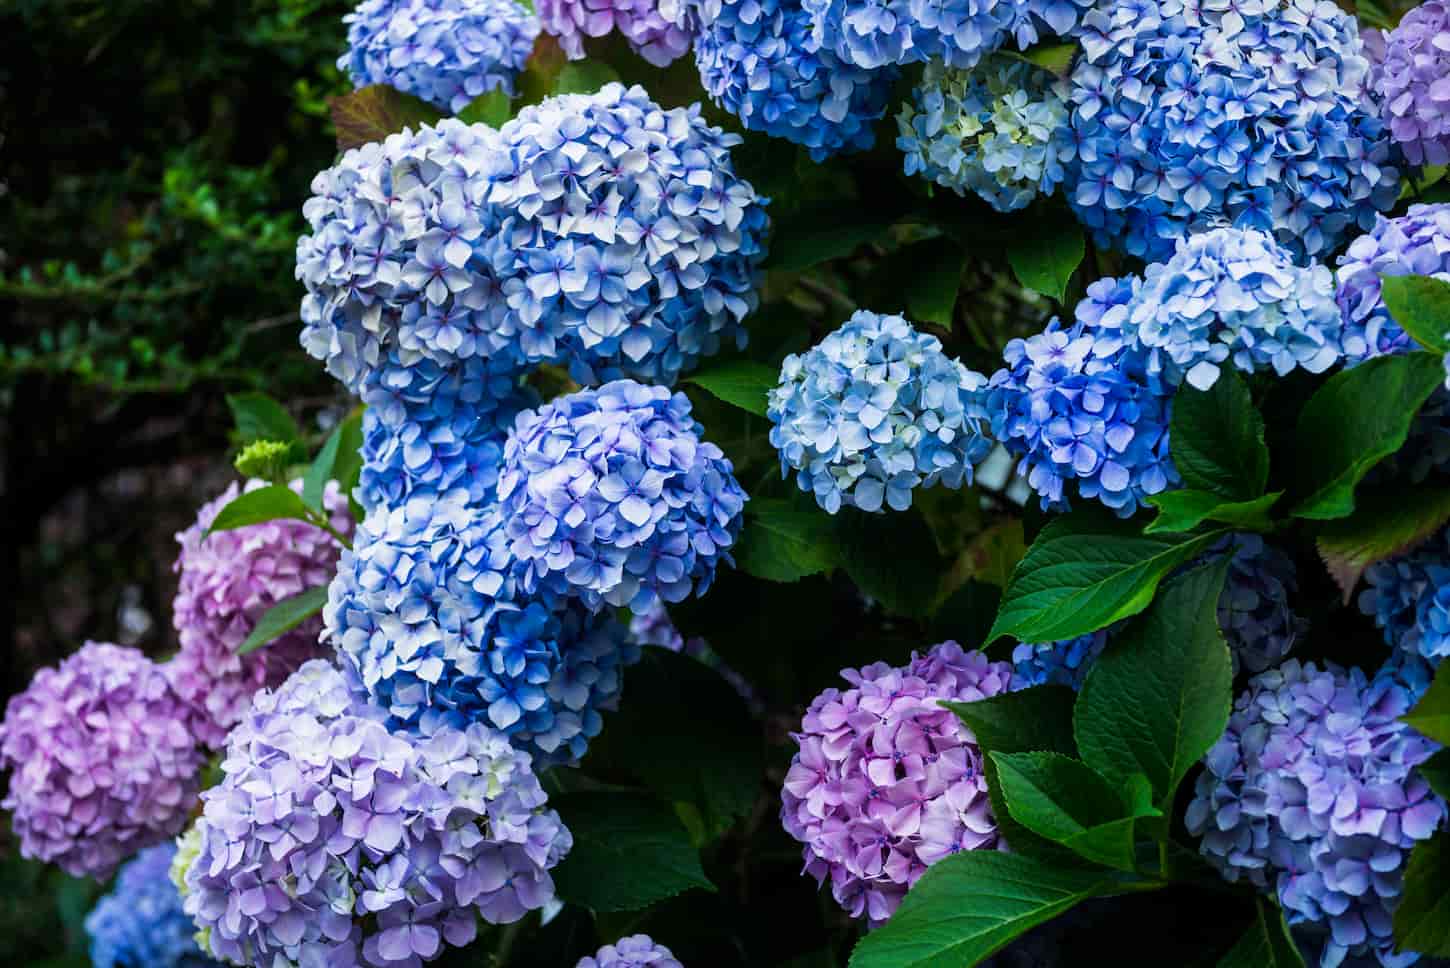 An image of Pink and Blue Hydrangea Flowers in the Garden.